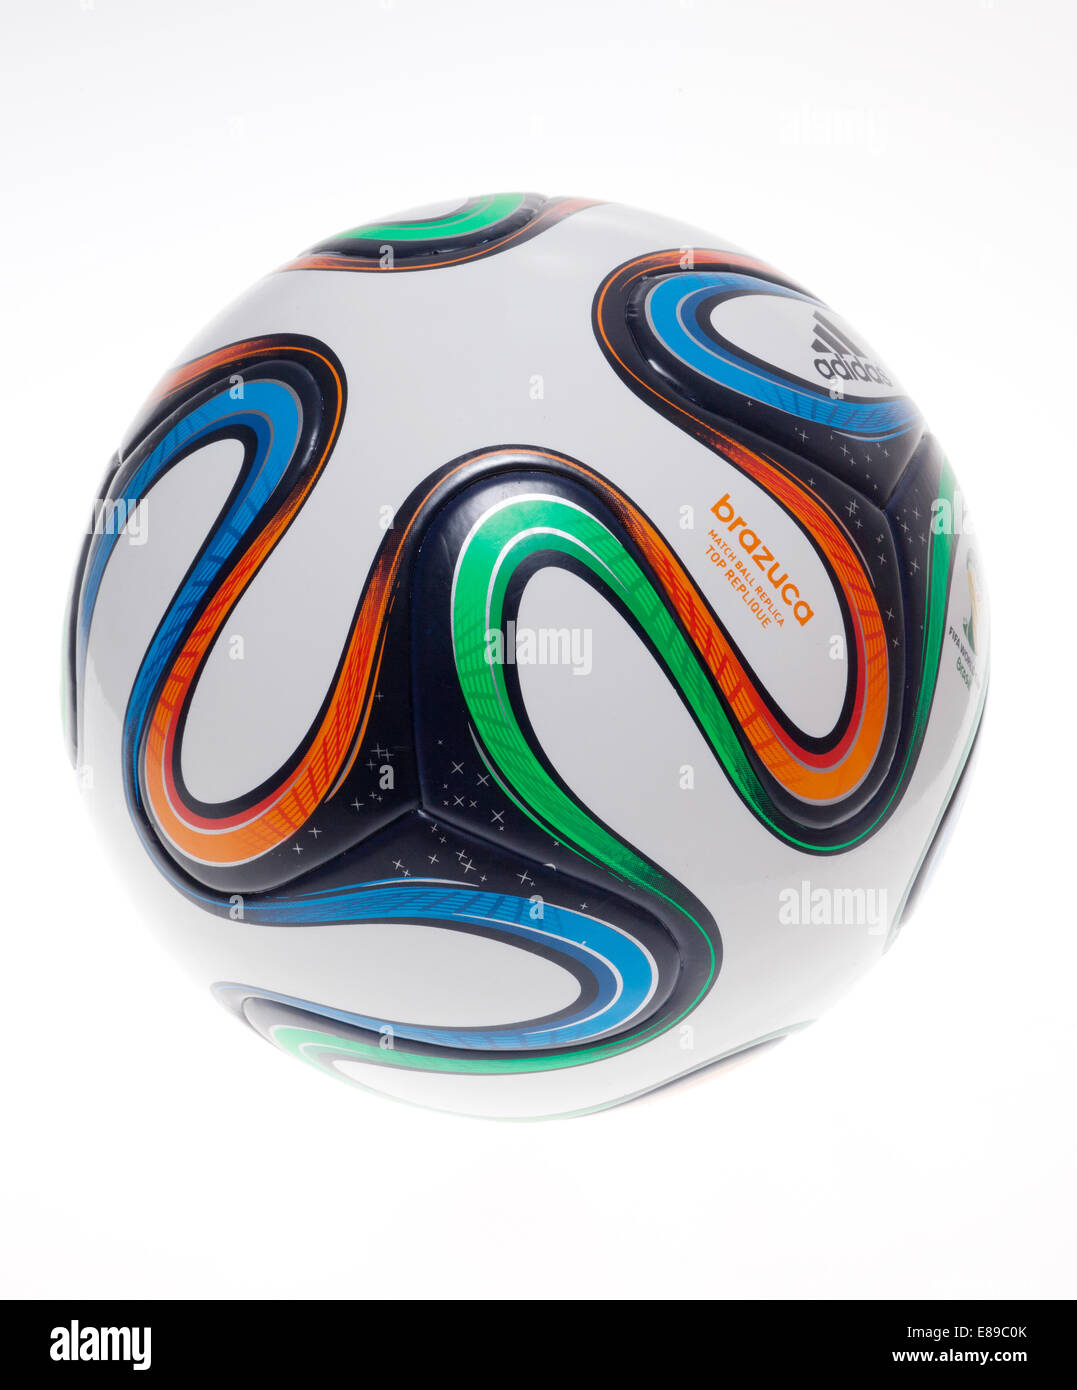 Berlin, Germany, the official match ball of the FIFA World Cup Brazil 2014 Stock Photo